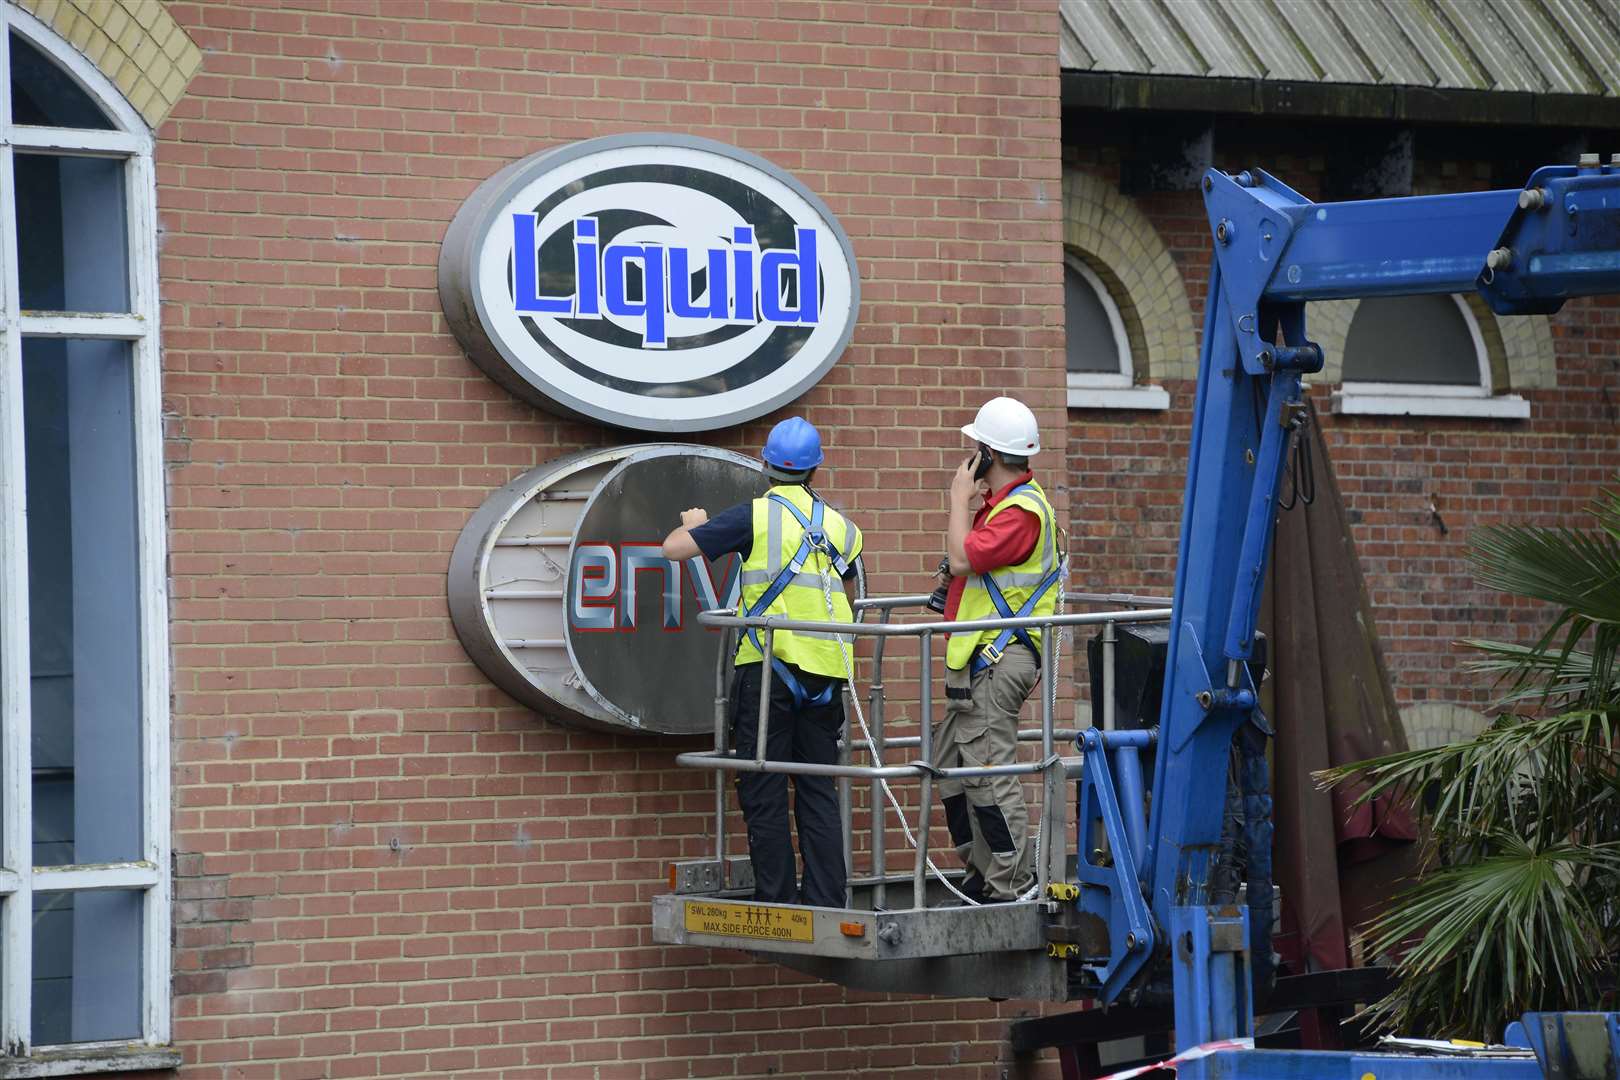 The signs coming down on Liquid and Envy Nightclub in East Hill after it closed. Picture: Paul Amos